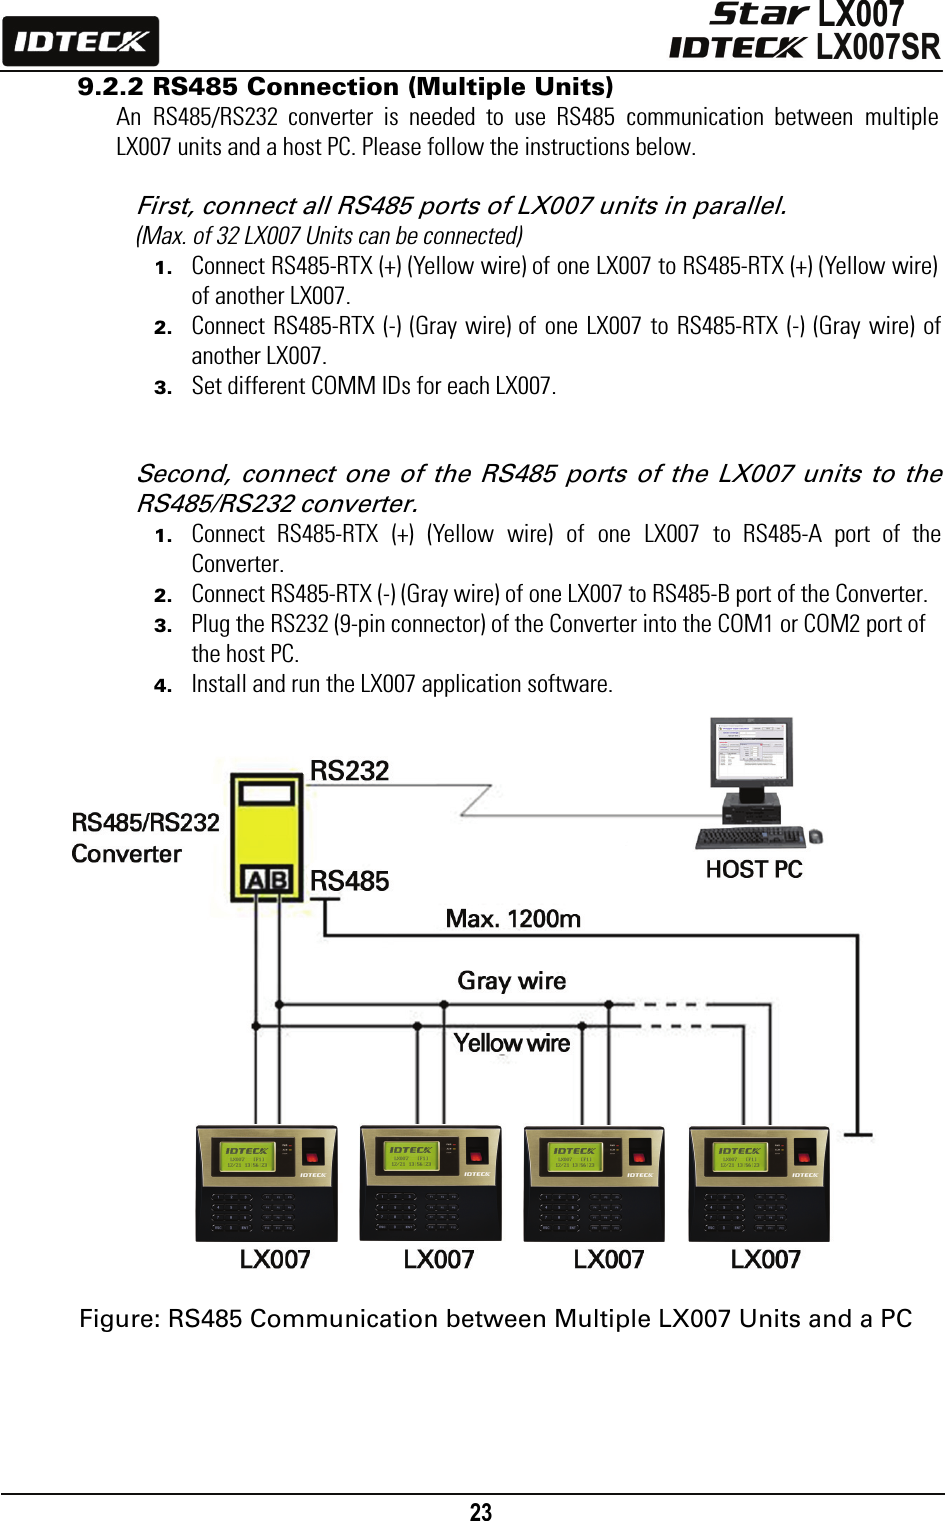                                                                                    23      9.2.2 RS485 Connection (Multiple Units) An RS485/RS232 converter is needed to use RS485 communication between multiple LX007 units and a host PC. Please follow the instructions below.  First, connect all RS485 ports of LX007 units in parallel.   (Max. of 32 LX007 Units can be connected) 1. Connect RS485-RTX (+) (Yellow wire) of one LX007 to RS485-RTX (+) (Yellow wire) of another LX007. 2. Connect RS485-RTX (-) (Gray wire) of one LX007 to RS485-RTX (-) (Gray wire) of another LX007. 3. Set different COMM IDs for each LX007.   Second, connect one of the RS485 ports of the LX007 units to the RS485/RS232 converter. 1. Connect RS485-RTX (+) (Yellow wire) of one LX007 to RS485-A port of the Converter. 2. Connect RS485-RTX (-) (Gray wire) of one LX007 to RS485-B port of the Converter. 3. Plug the RS232 (9-pin connector) of the Converter into the COM1 or COM2 port of the host PC. 4. Install and run the LX007 application software.                      Figure: RS485 Communication between Multiple LX007 Units and a PC    